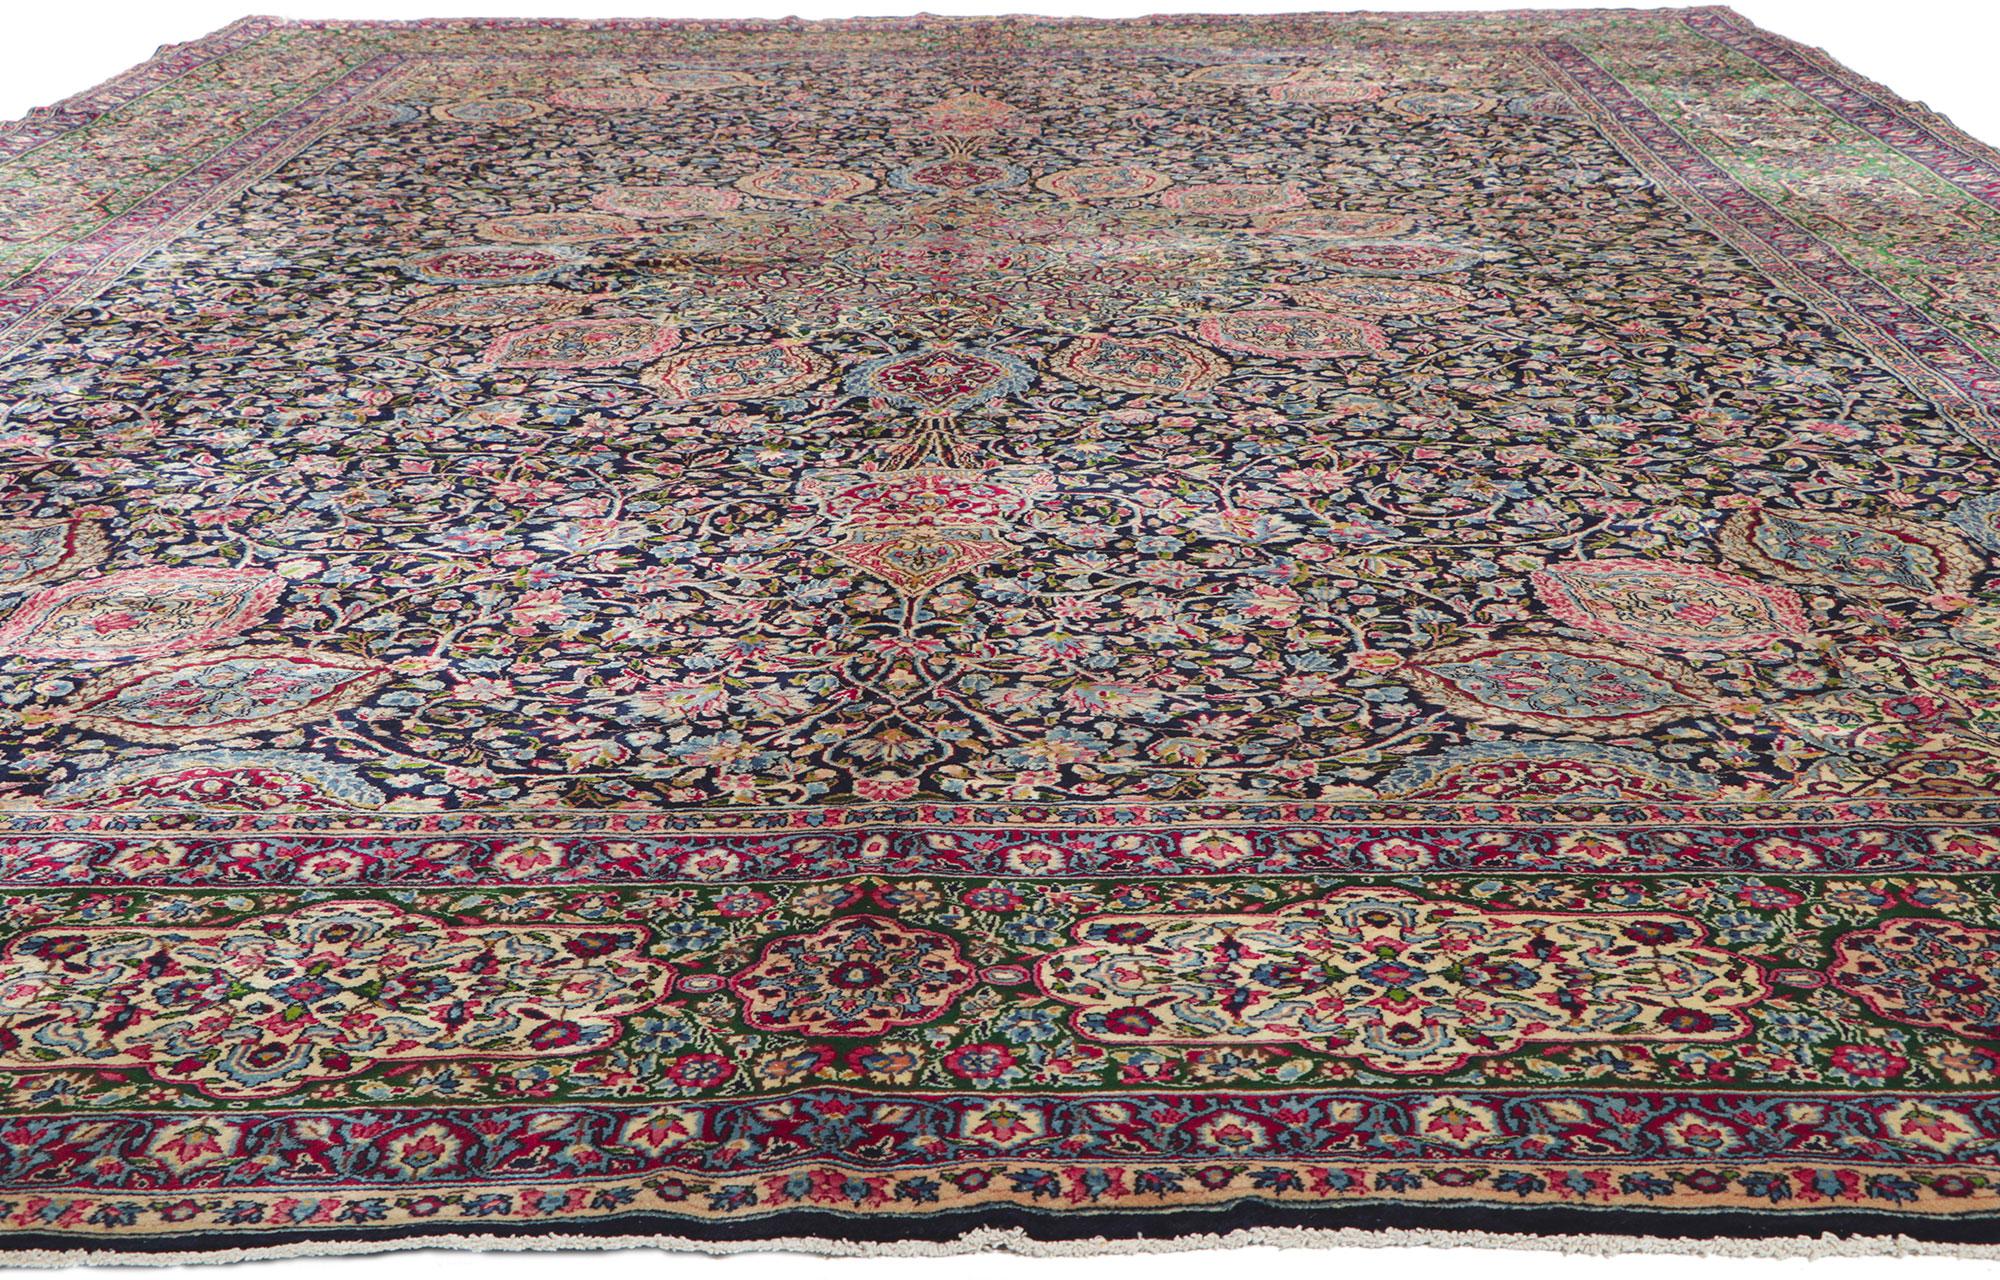 Kirman Vintage Persian Kerman Rug with The Ardabil Carpet Design, Hotel Lobby Size Rug For Sale